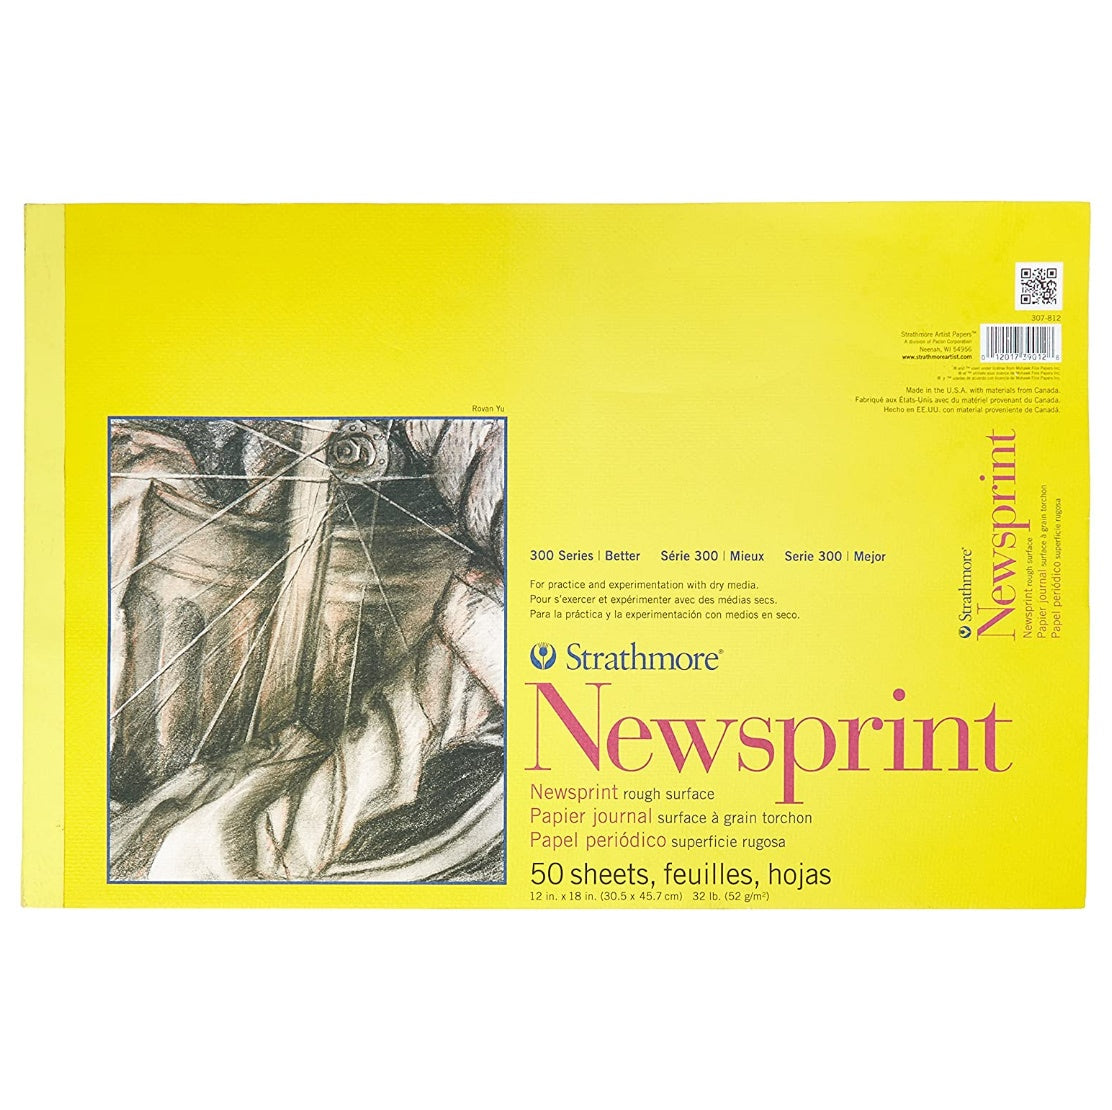 Strathmore Newsprint Paper Pad - 300 Series - Rough Surface - 12 x 18 inches by Strathmore - K. A. Artist Shop